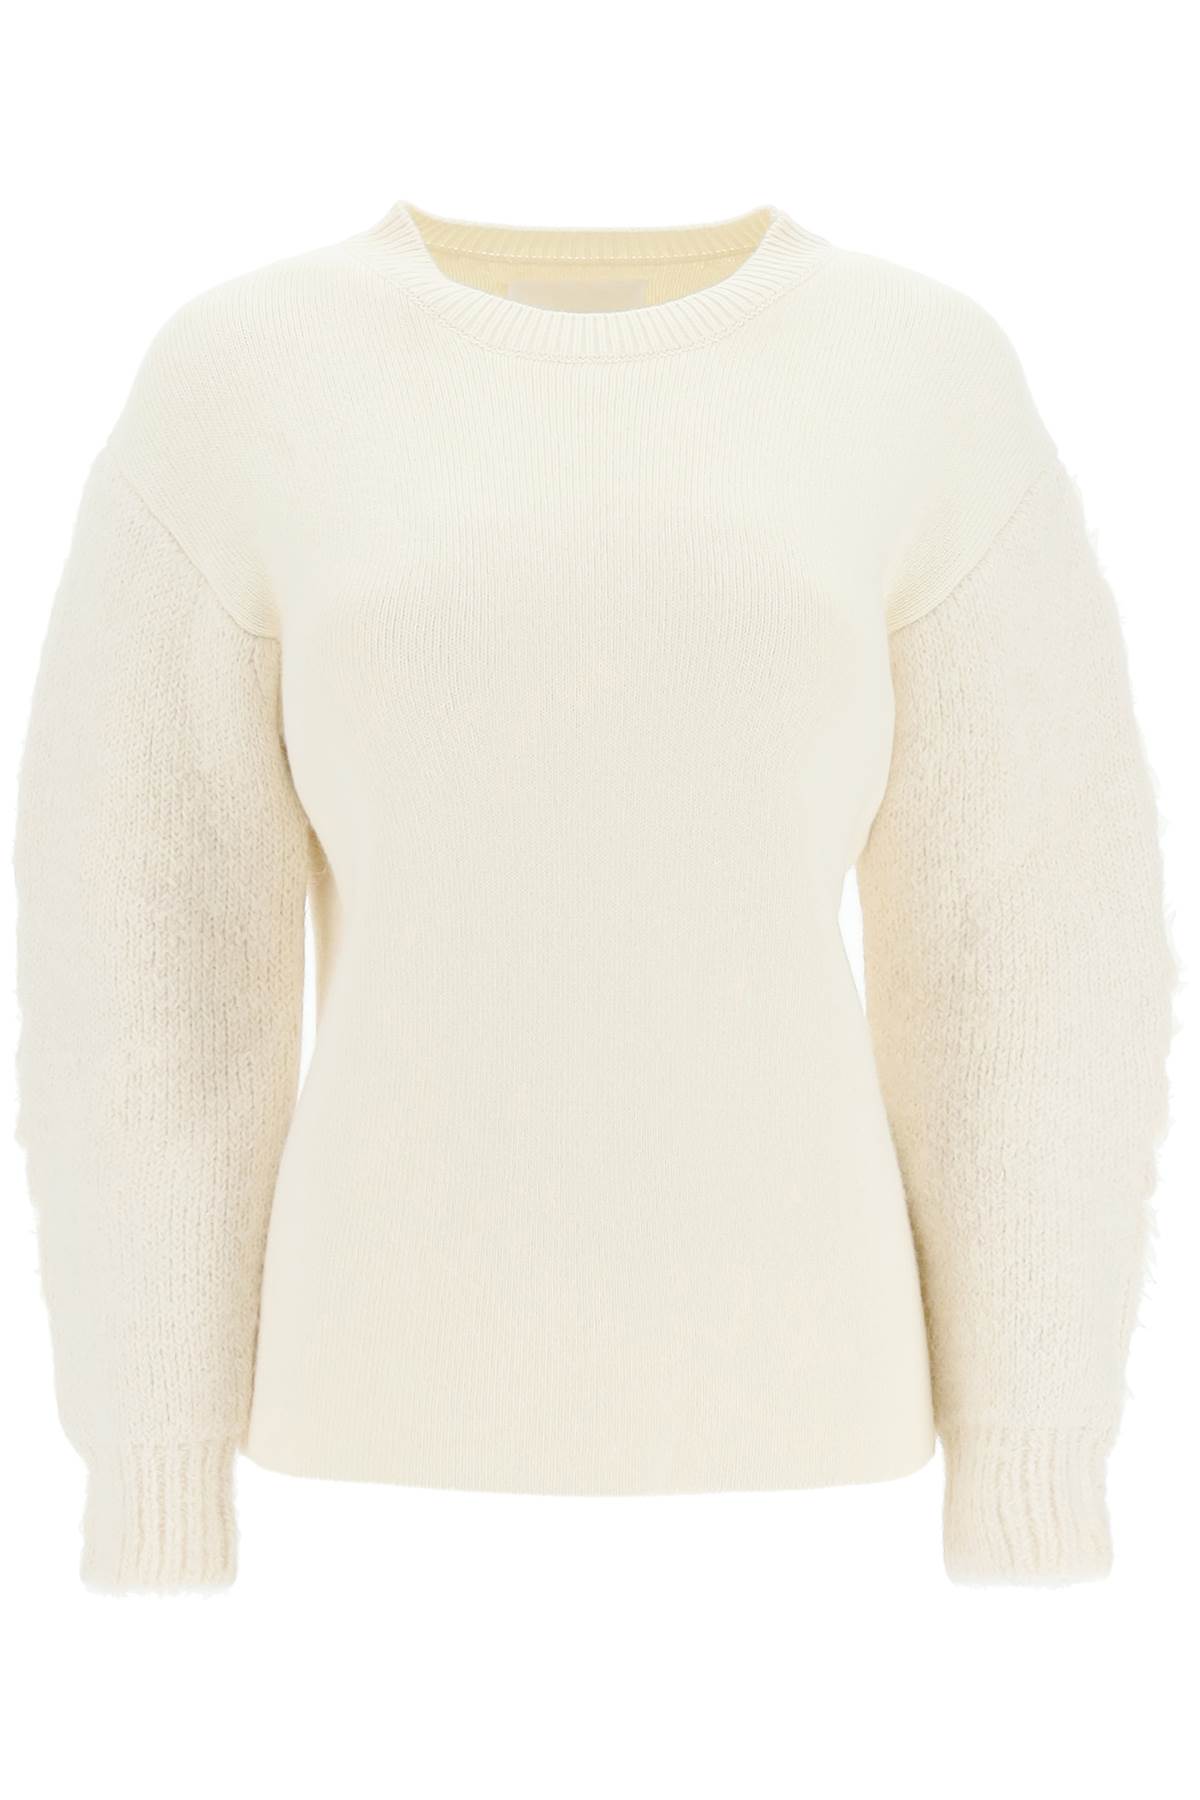 Jil Sander Wool And Cashmere Sweater With Shaped Sleeves